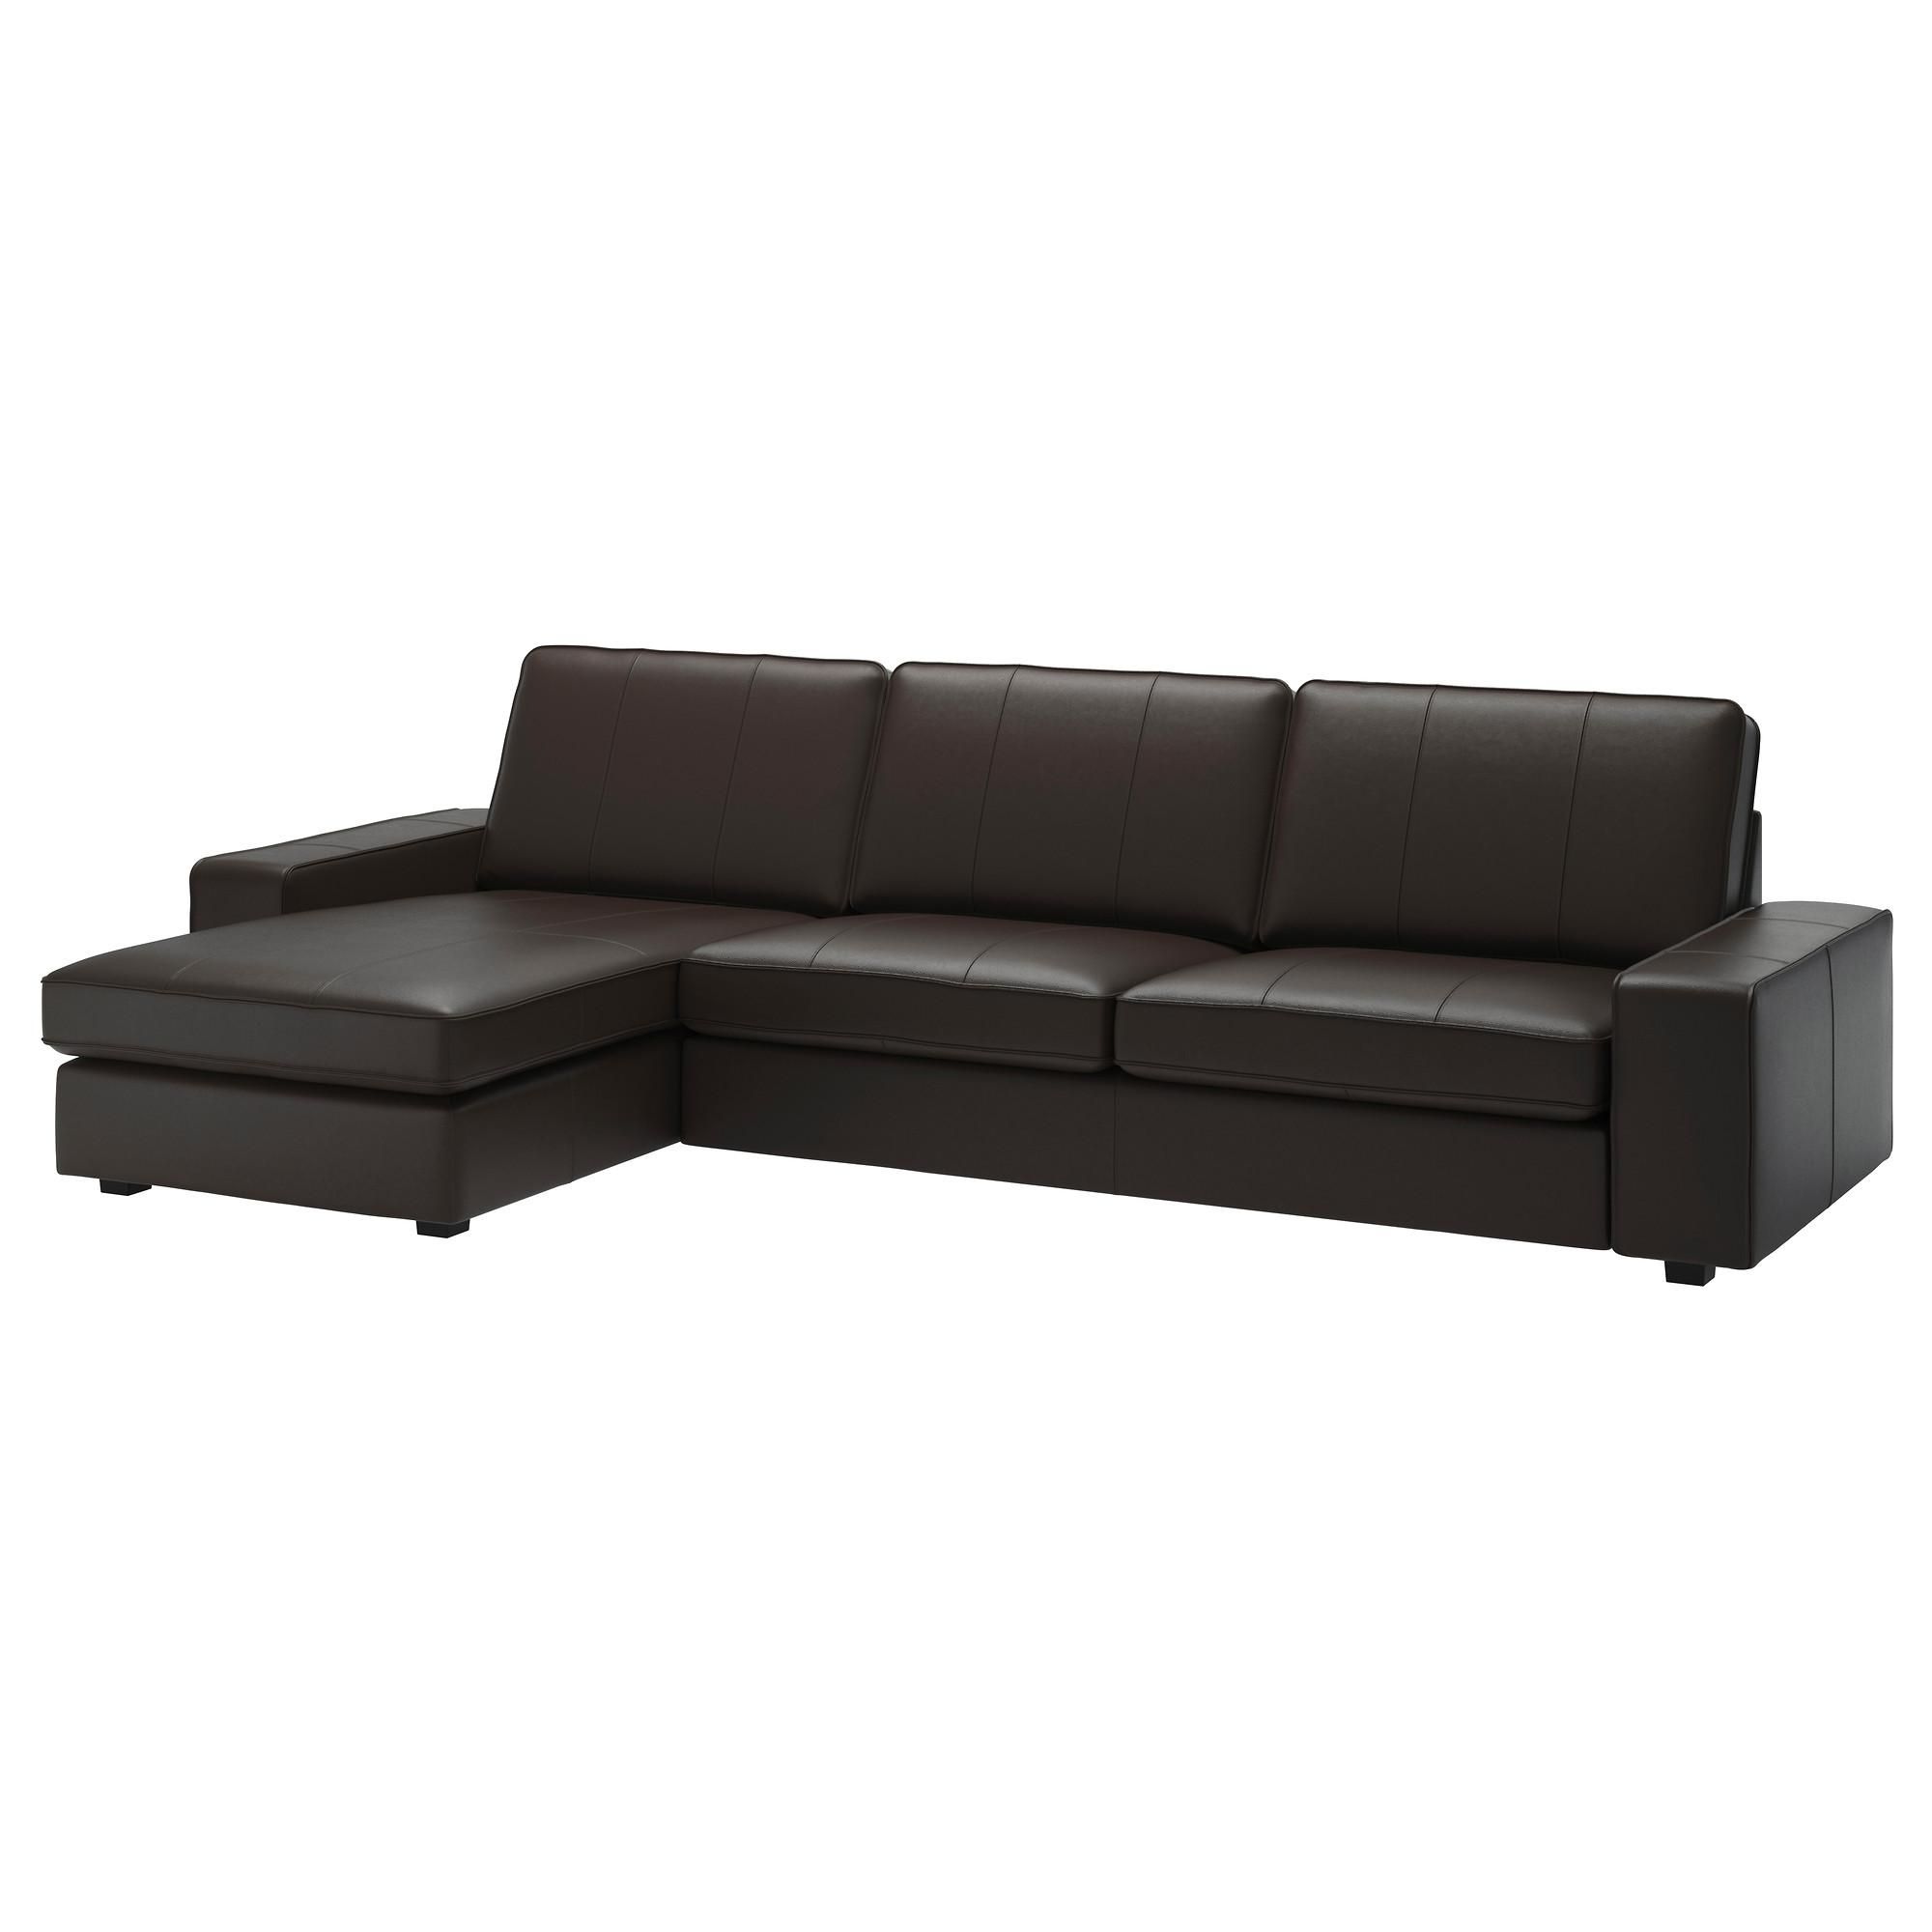 Kivik 4 Seat Sofa With Chaise Longue/grann/bomstad Dark Brown – Ikea Intended For Ikea Chaise Lounge Sofa (Photo 15 of 20)